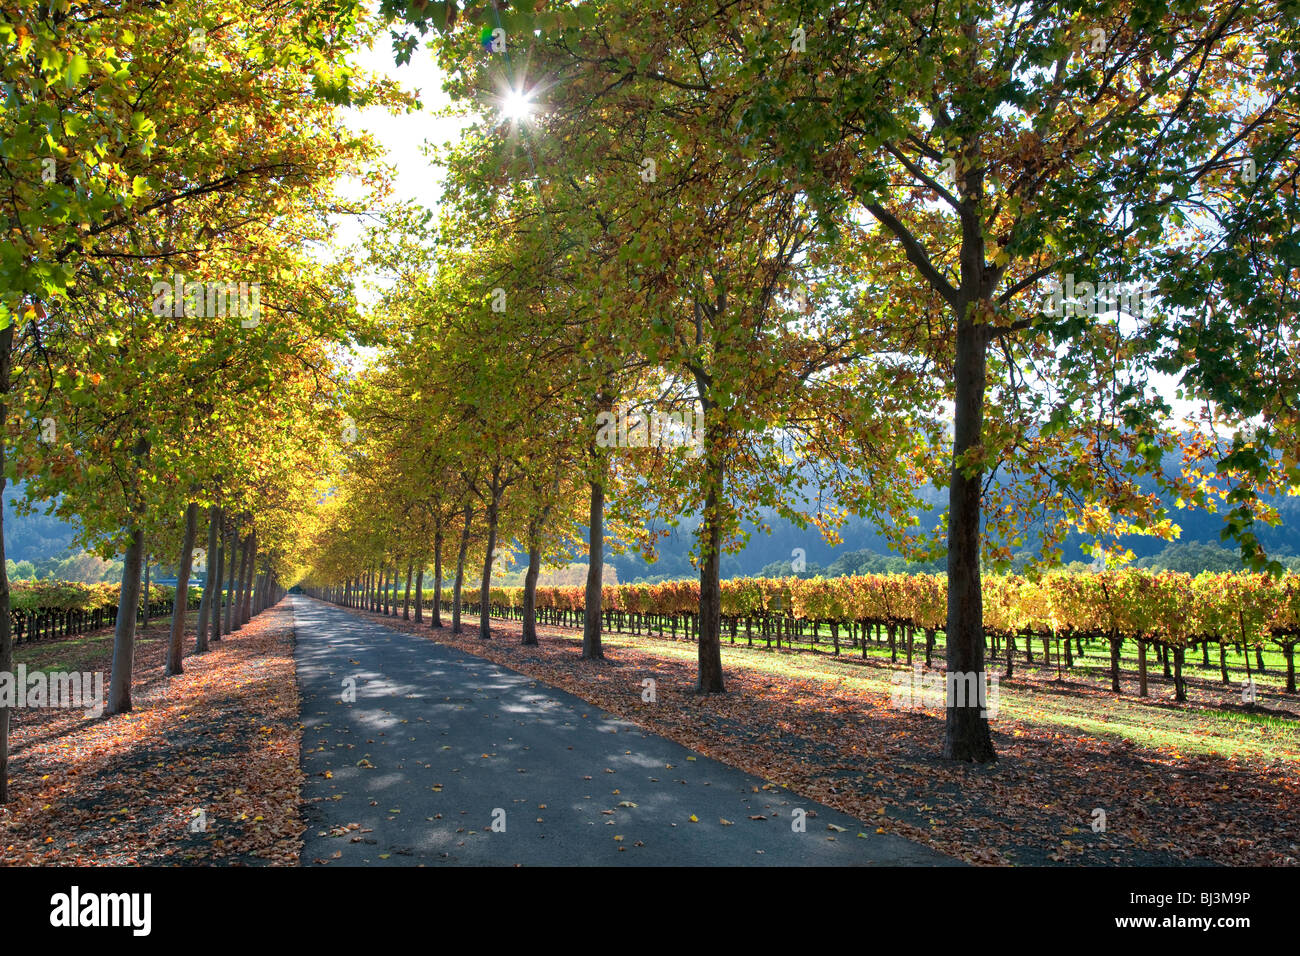 Tree lined roadway with grape vineyard in fall color. Napa Valley, California. Stock Photo